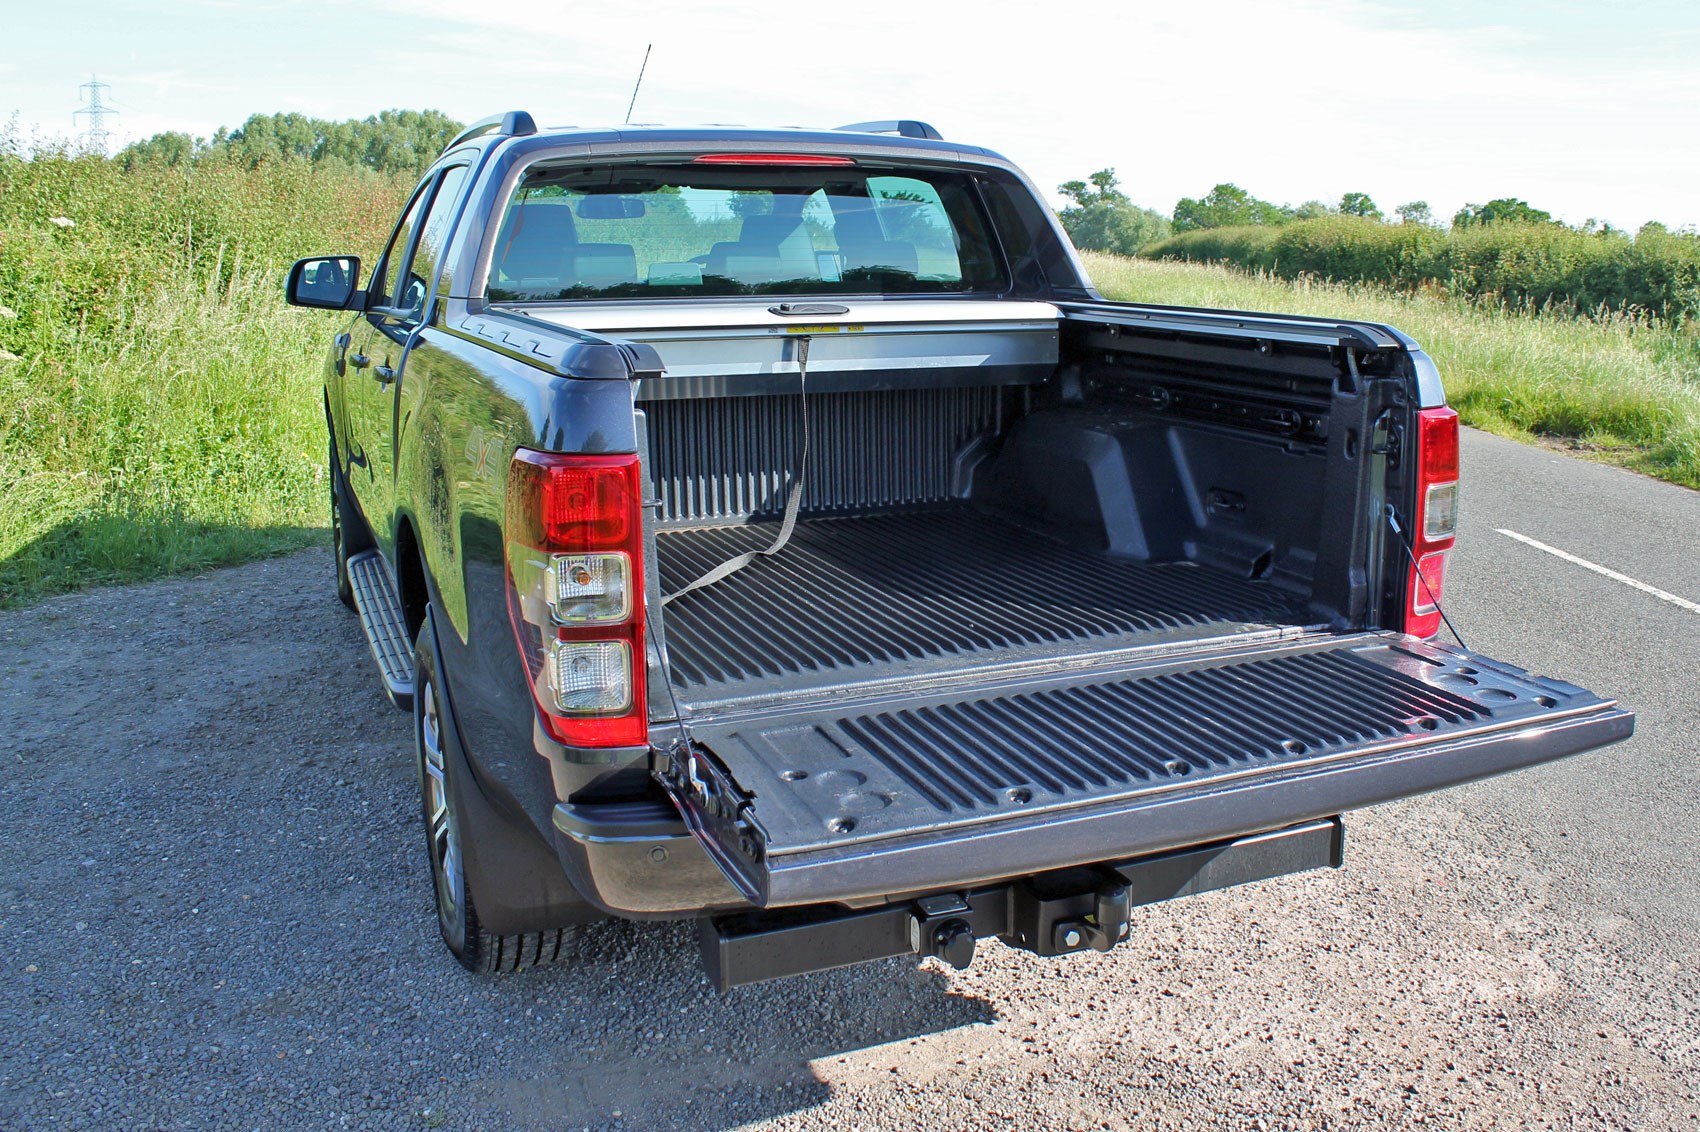 Ford Ranger Wildtrak Euro 6 review - load area